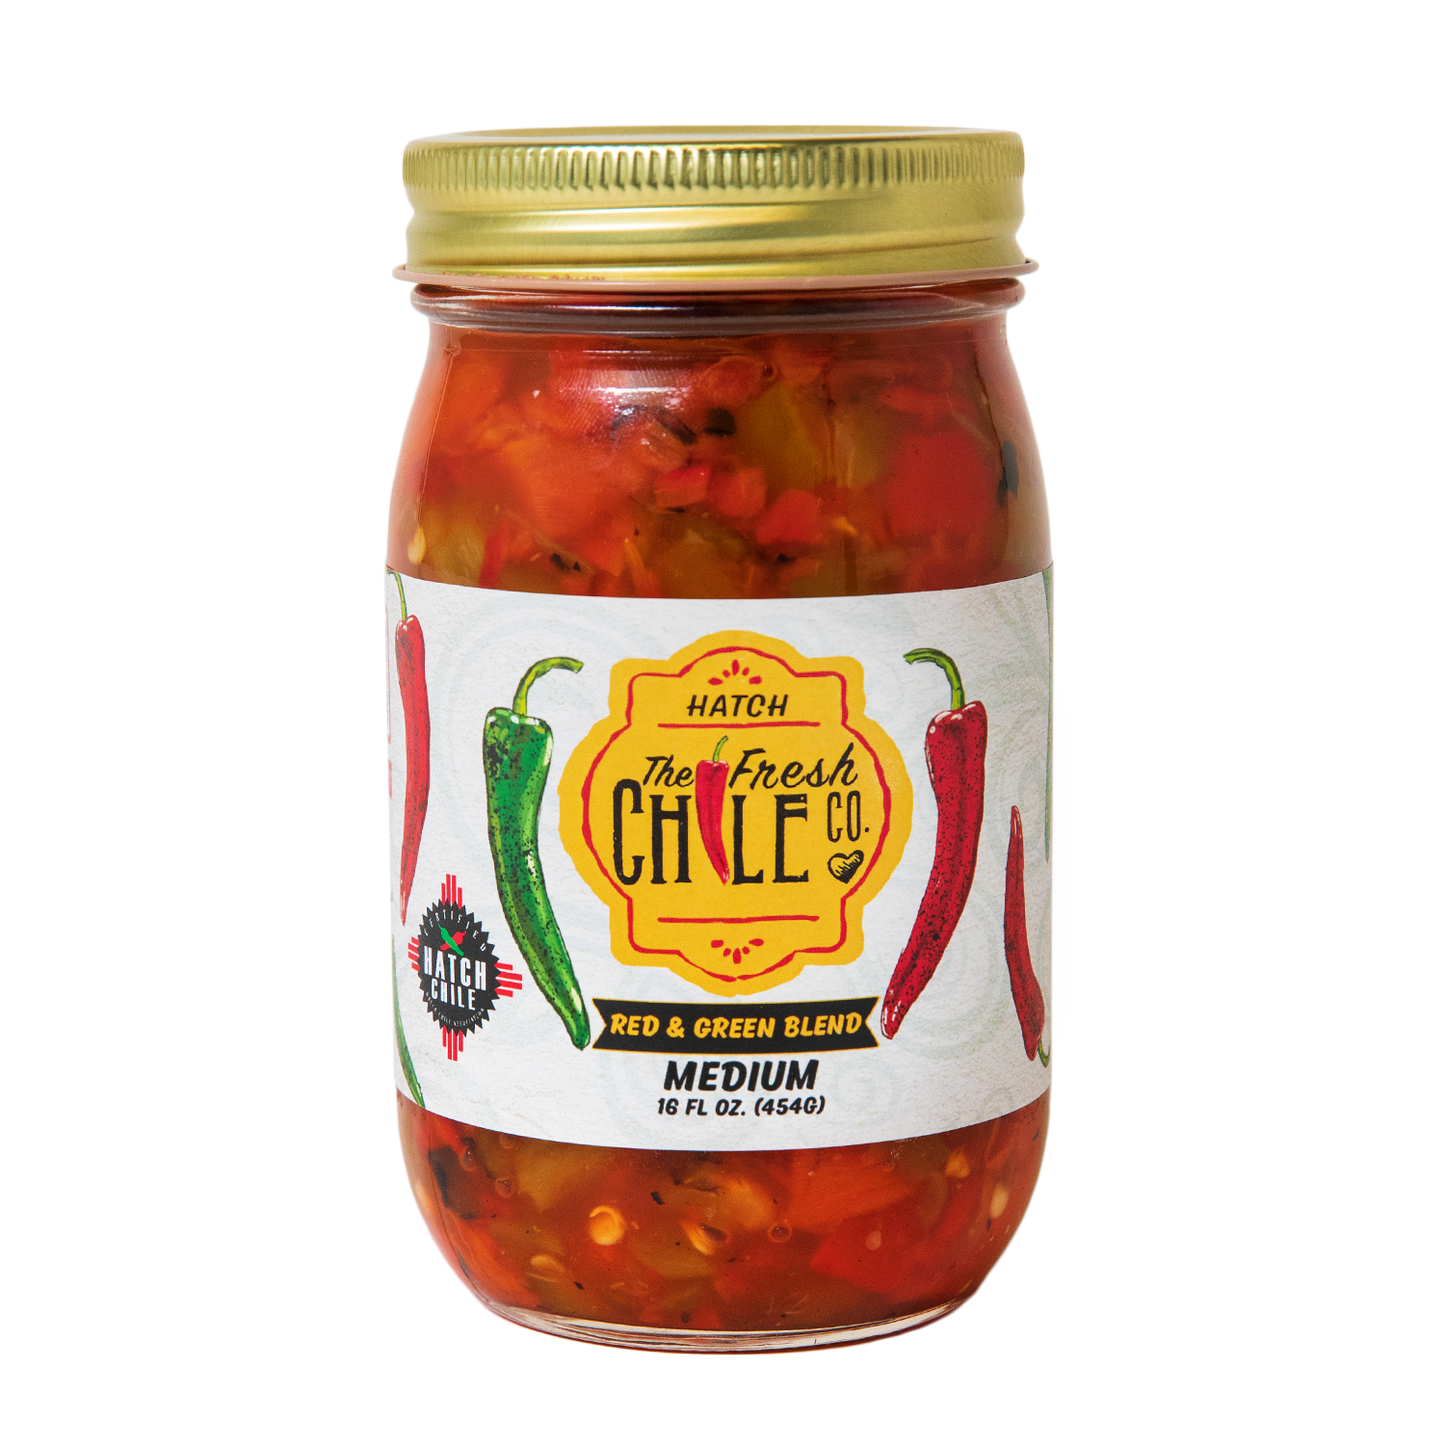 Hatch Chile Variety Pack - The Fresh Chile Company